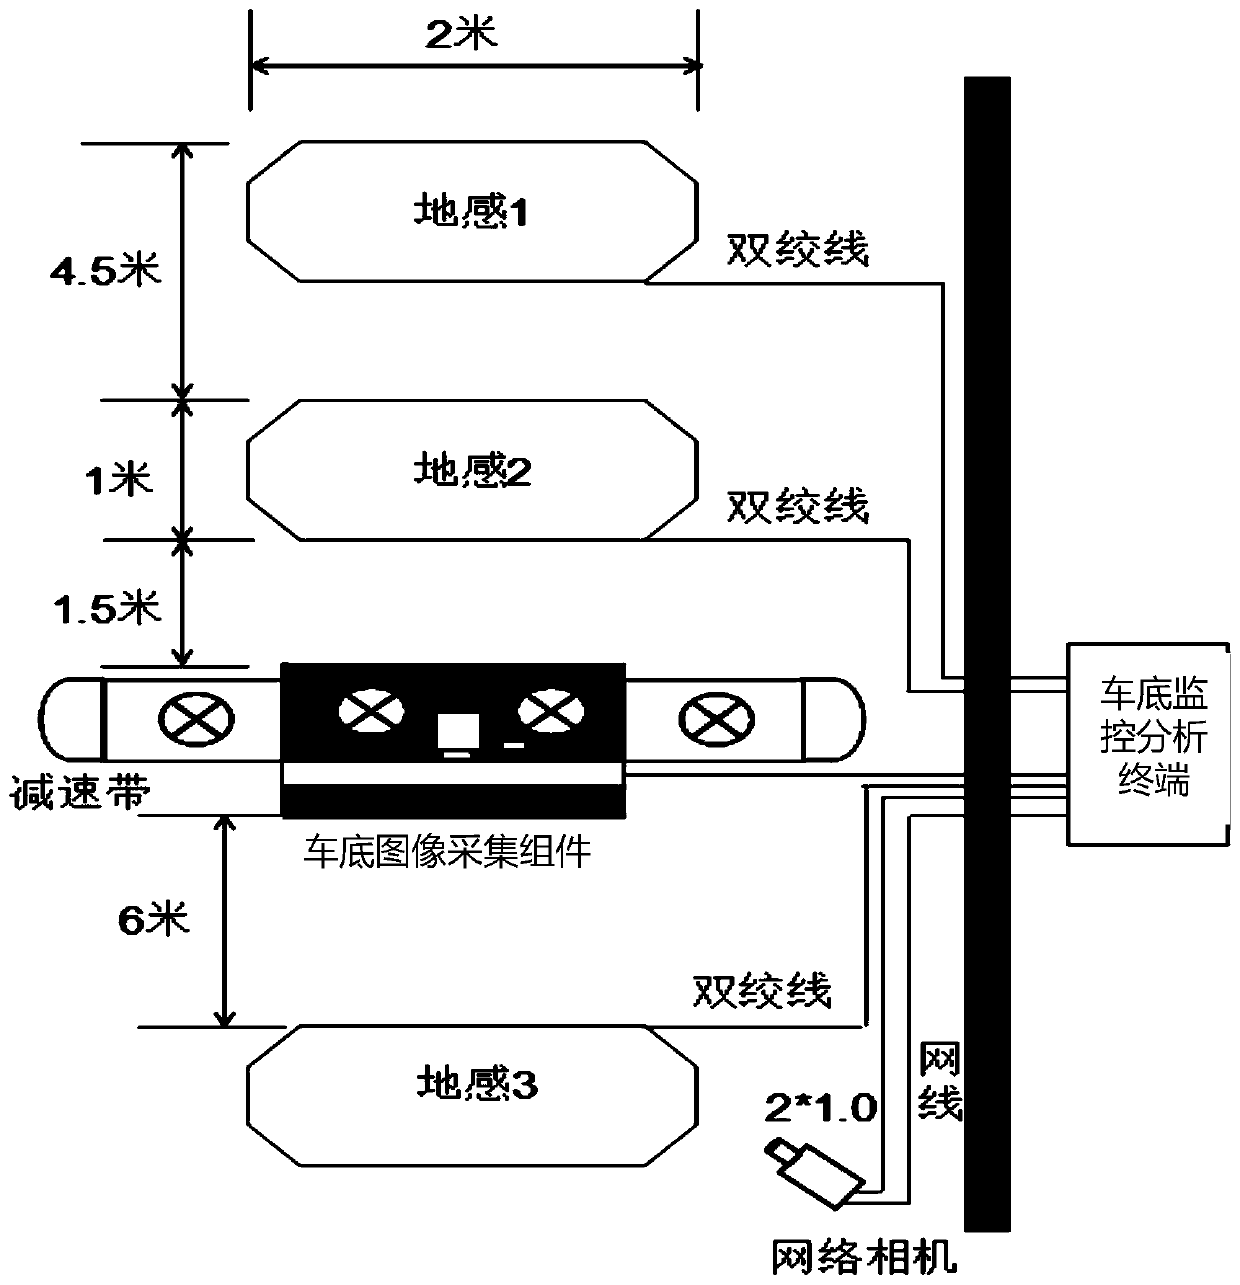 Vehicle bottom image acquisition method and system